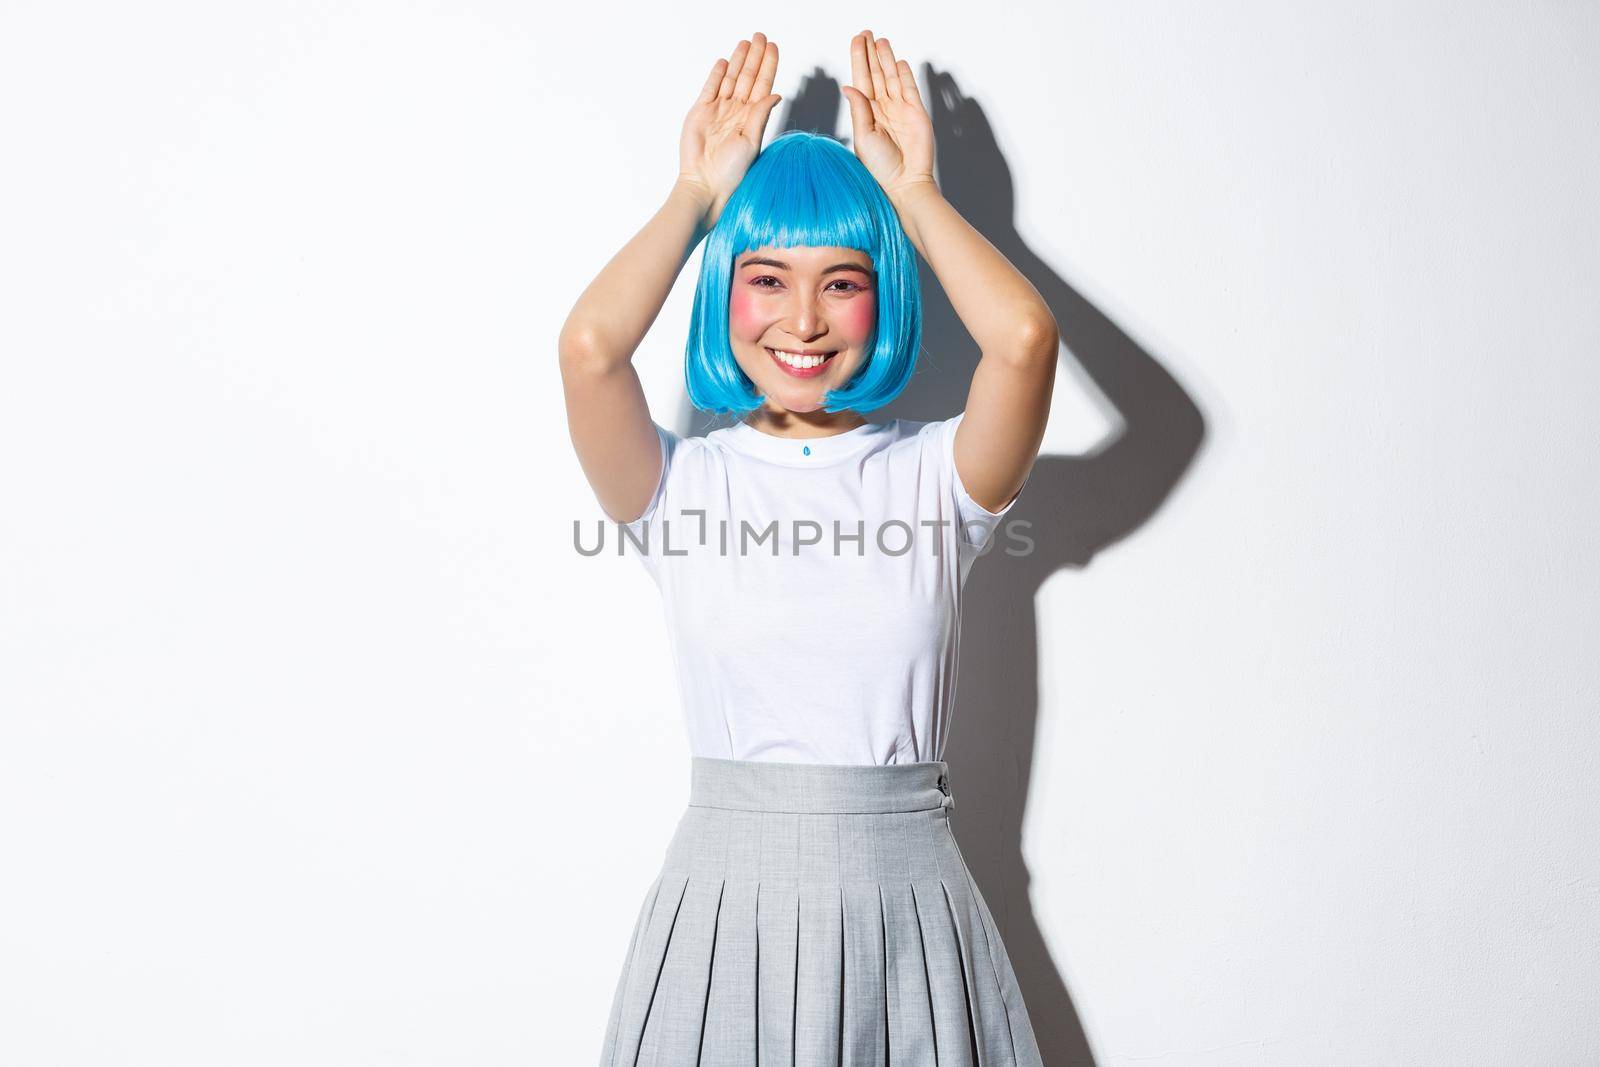 Image of beautiful asian girl smiling and making bunny ears gesture, wearing blue wig for halloween party, standing over white background.